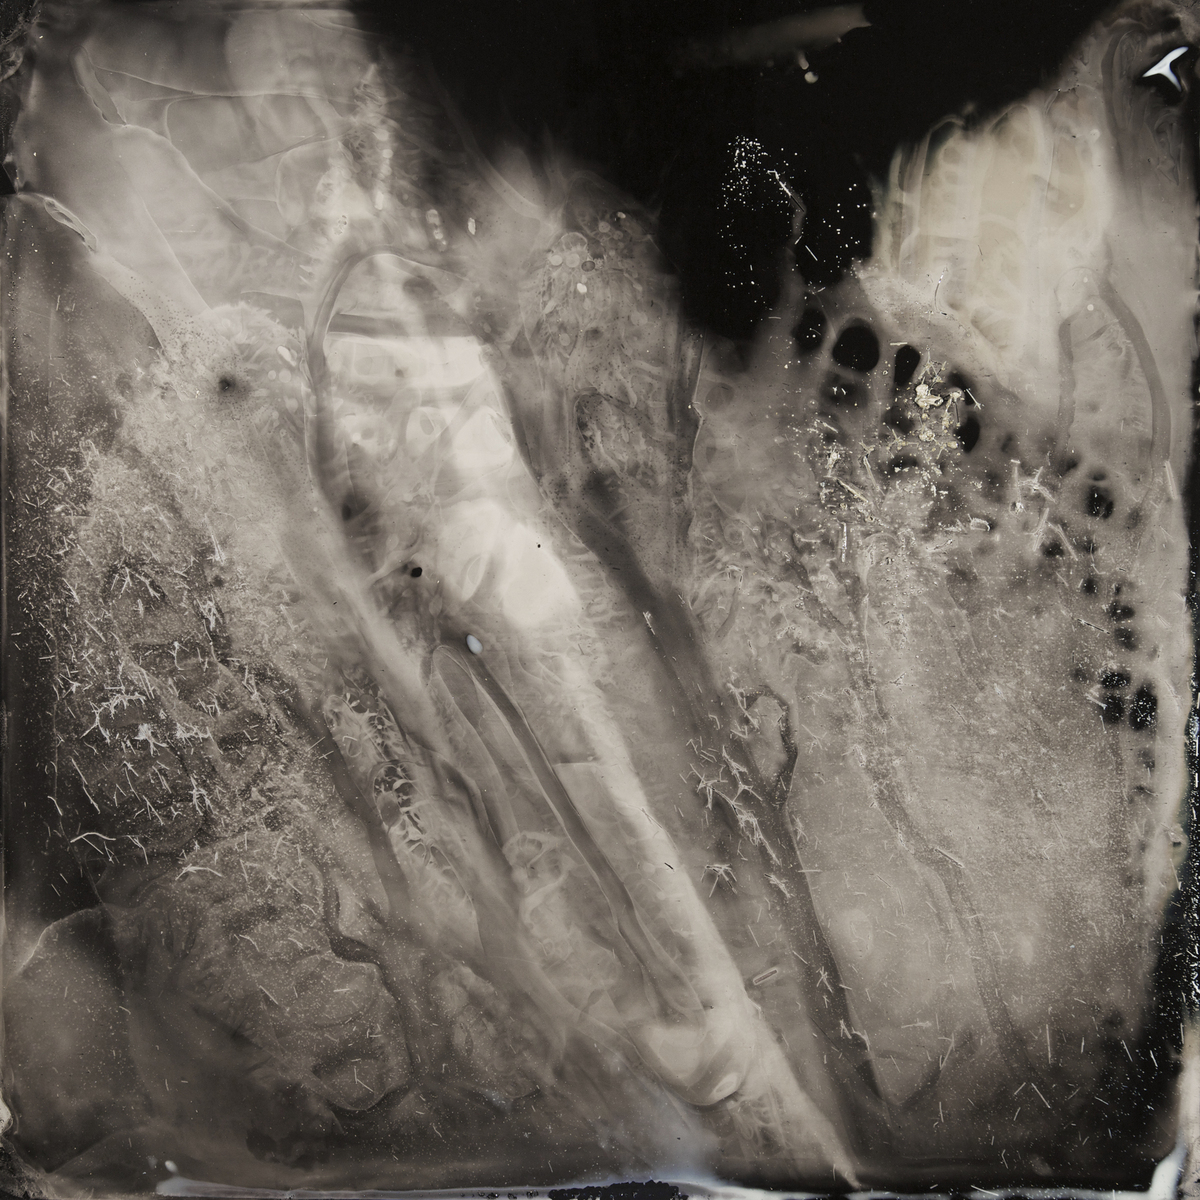 11:45 PM, March 12, 2015. Collodion tintype, 14x14 inches.